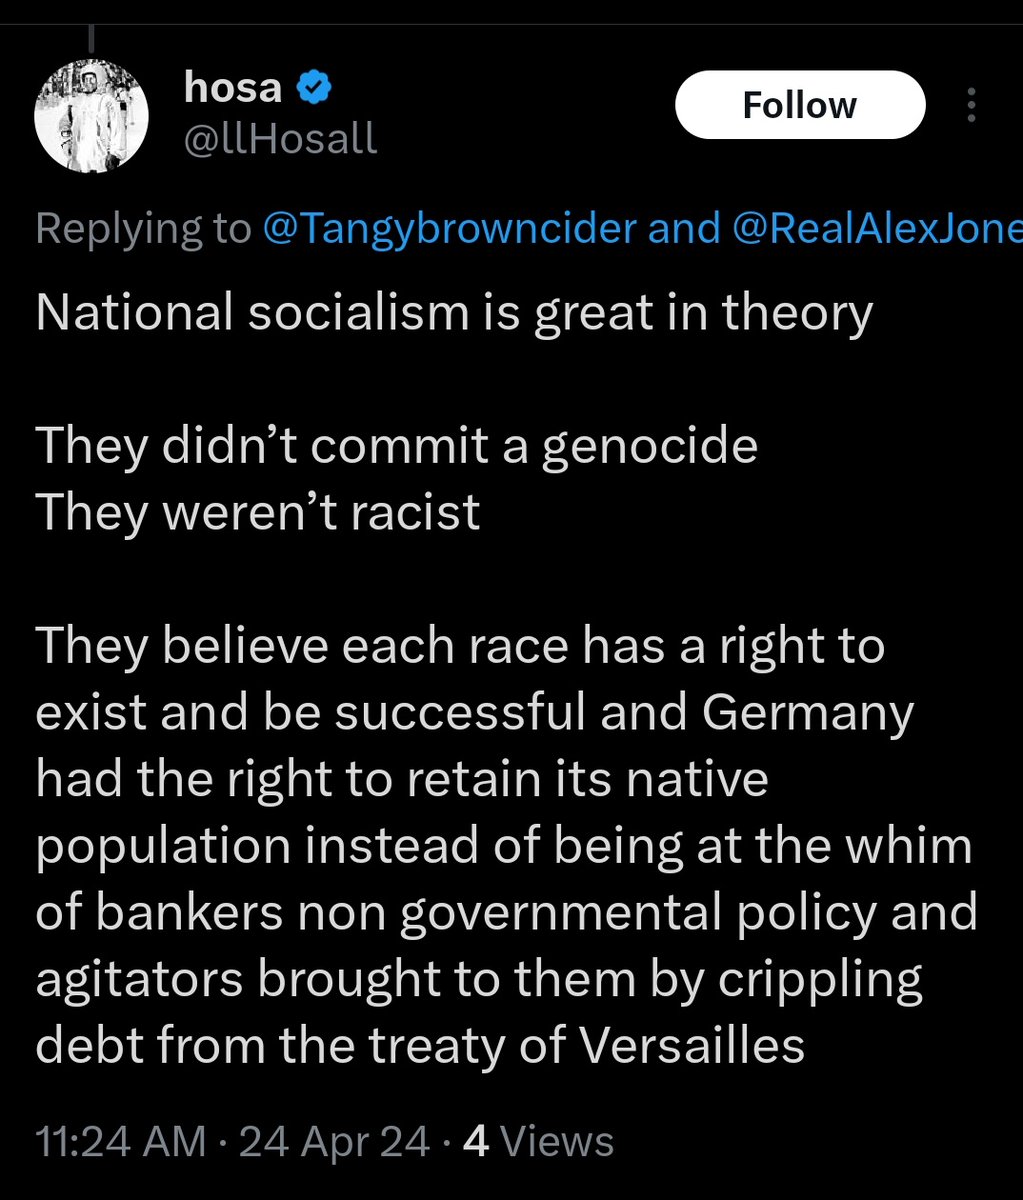 National socialism is not great in theory. 

The nazis did commit a genocide. They were racist. 

They did not believe each race had a right to exist and be successful. And Germany was never 'at the whim of bankers' non-governmental policy and agitators.'